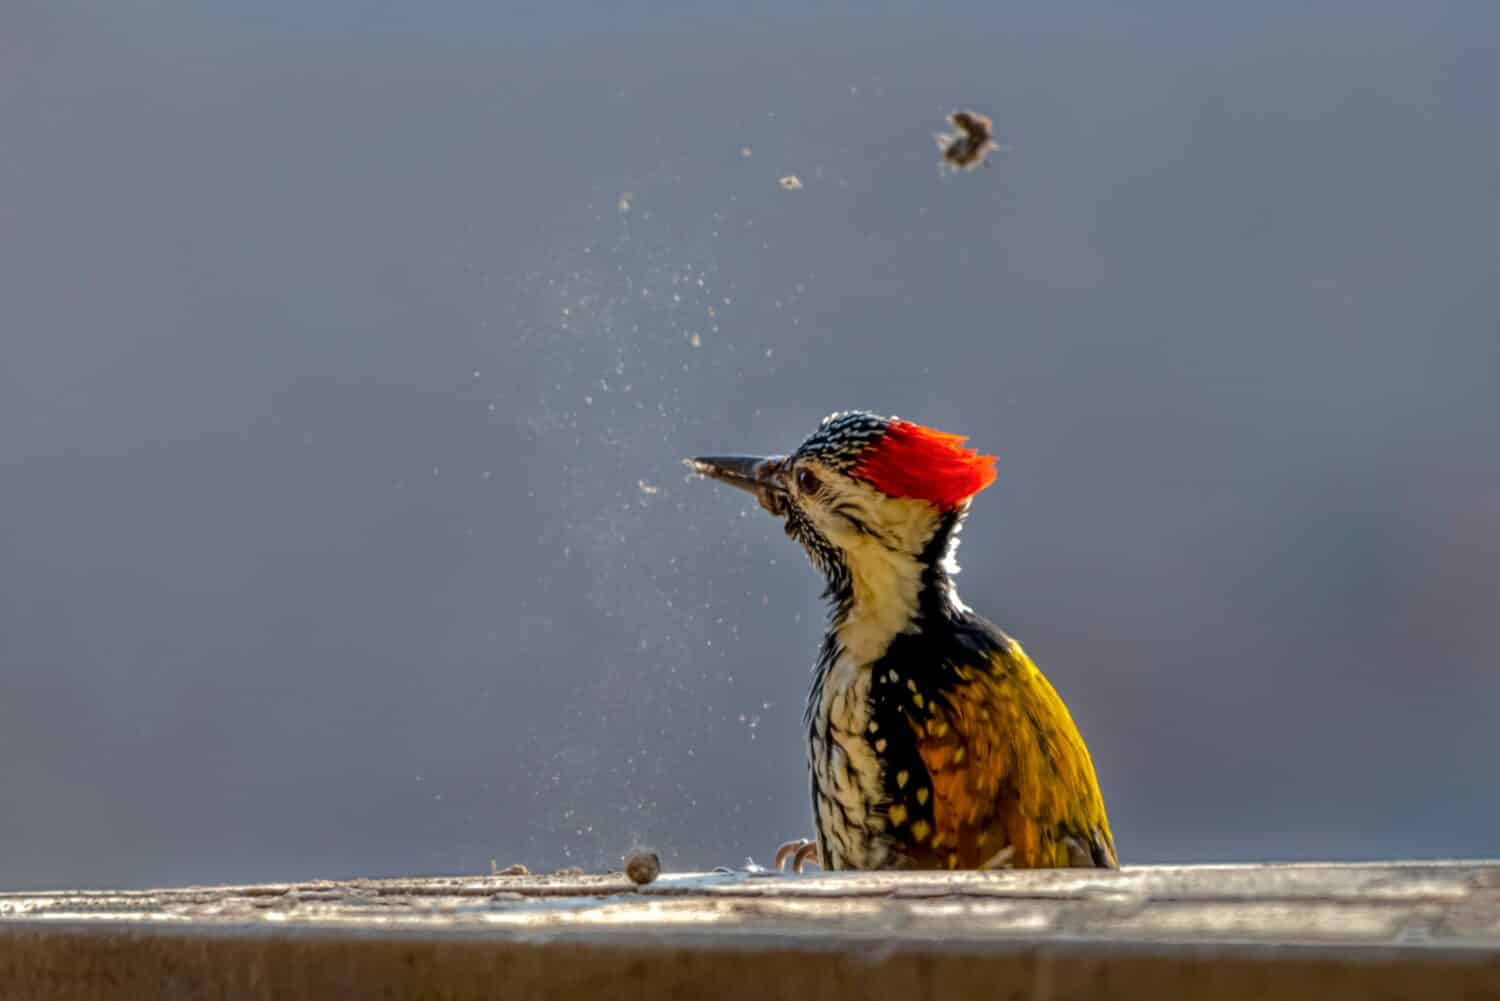 The black-rumped flameback, also known as the lesser golden-backed woodpecker or lesser goldenback, is a woodpecker found widely distributed in the Indian subcontinent